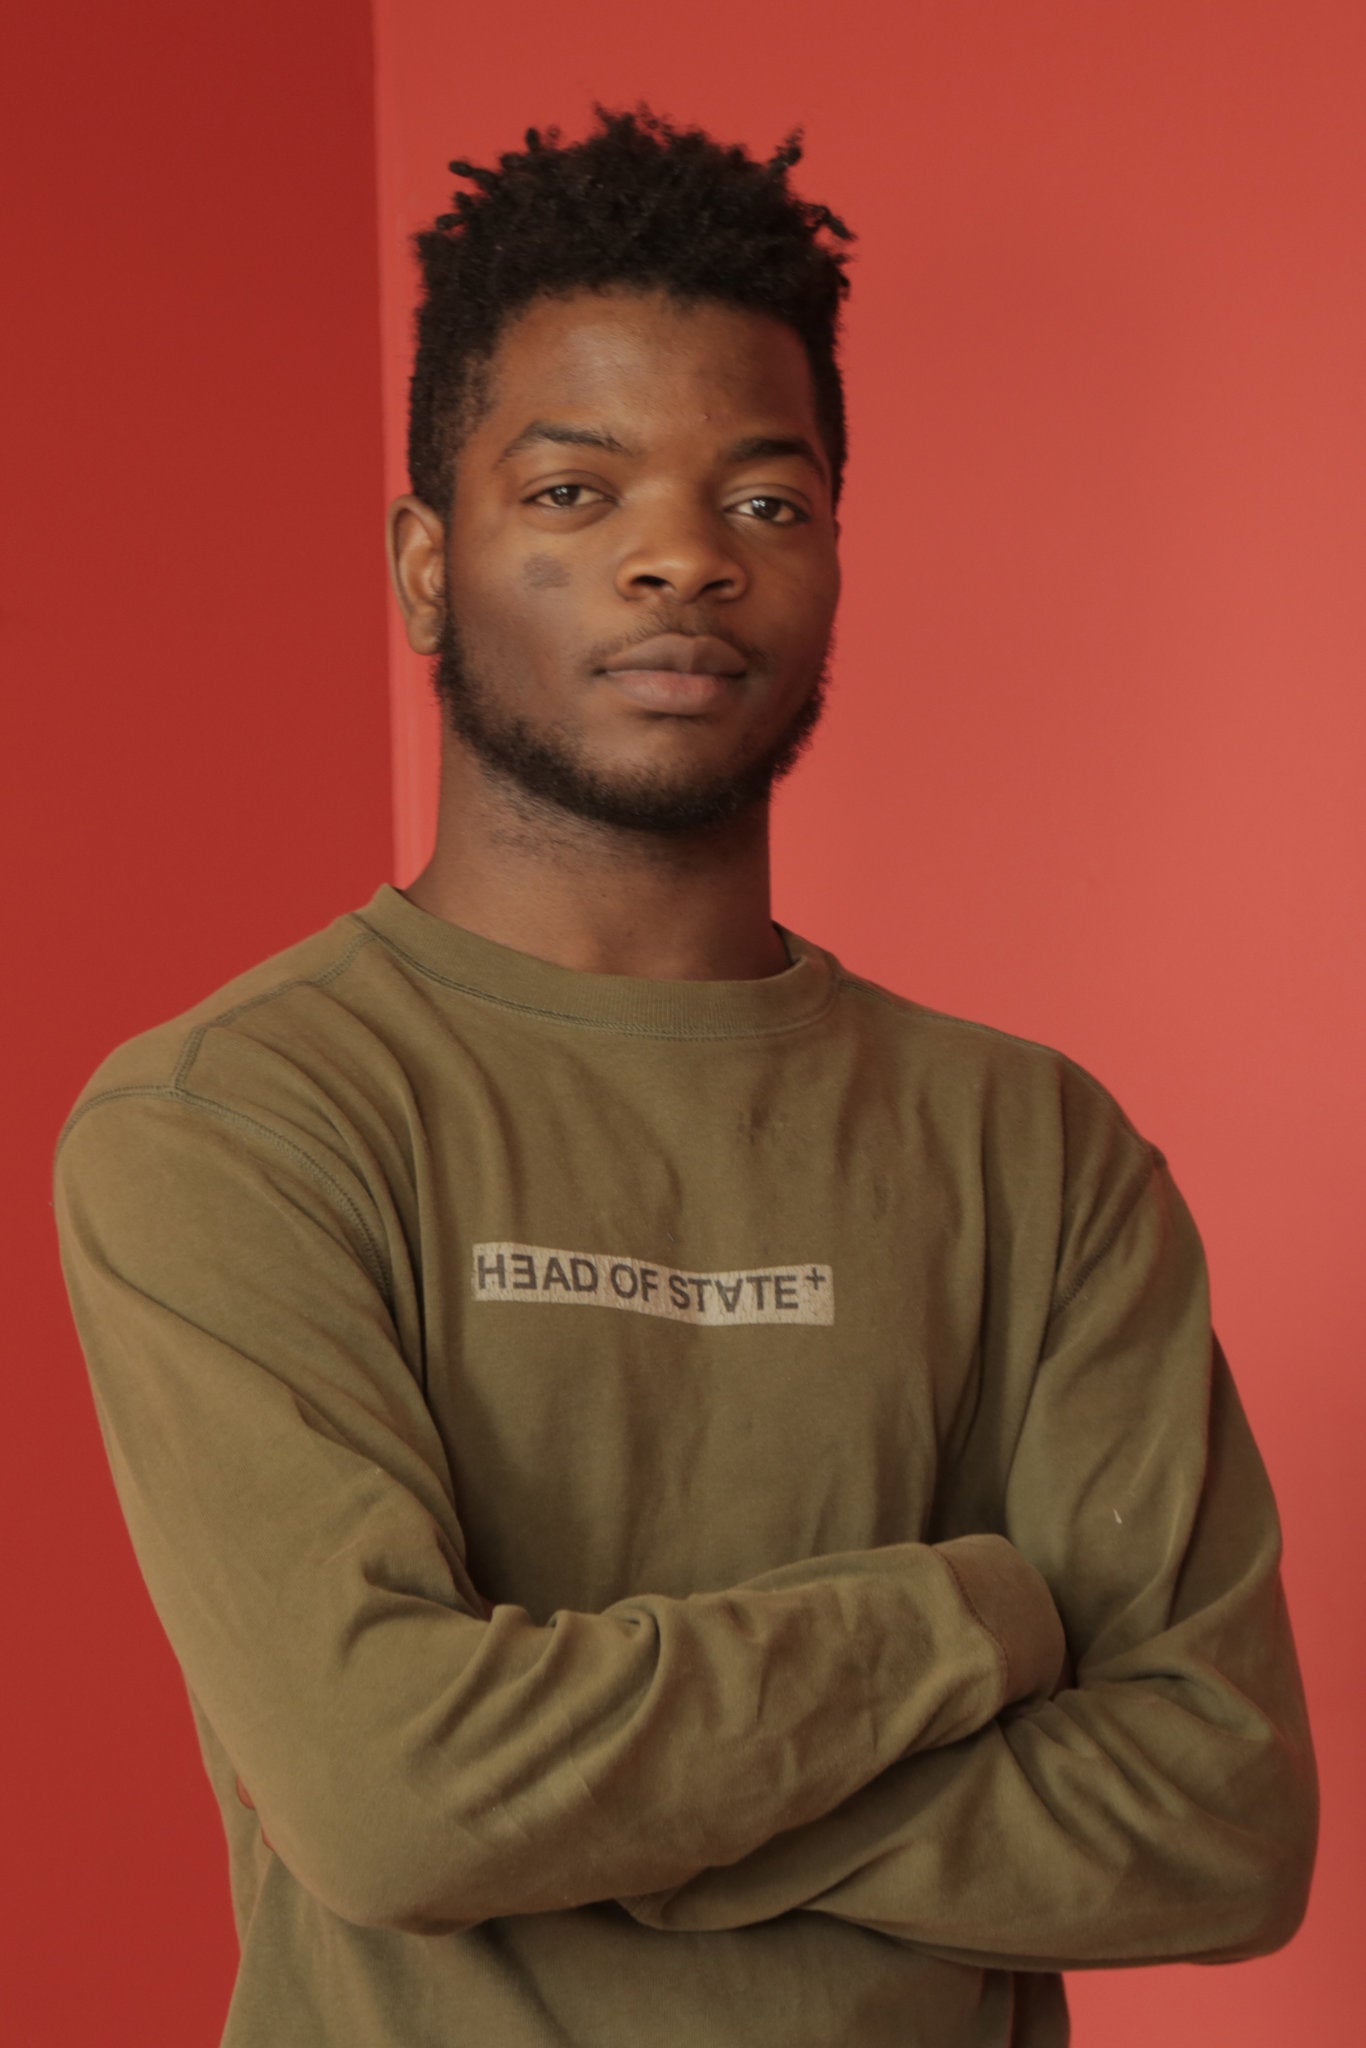 19-Year-Old Nigerian Becomes The Youngest Designer To Show At Men's NYFW
